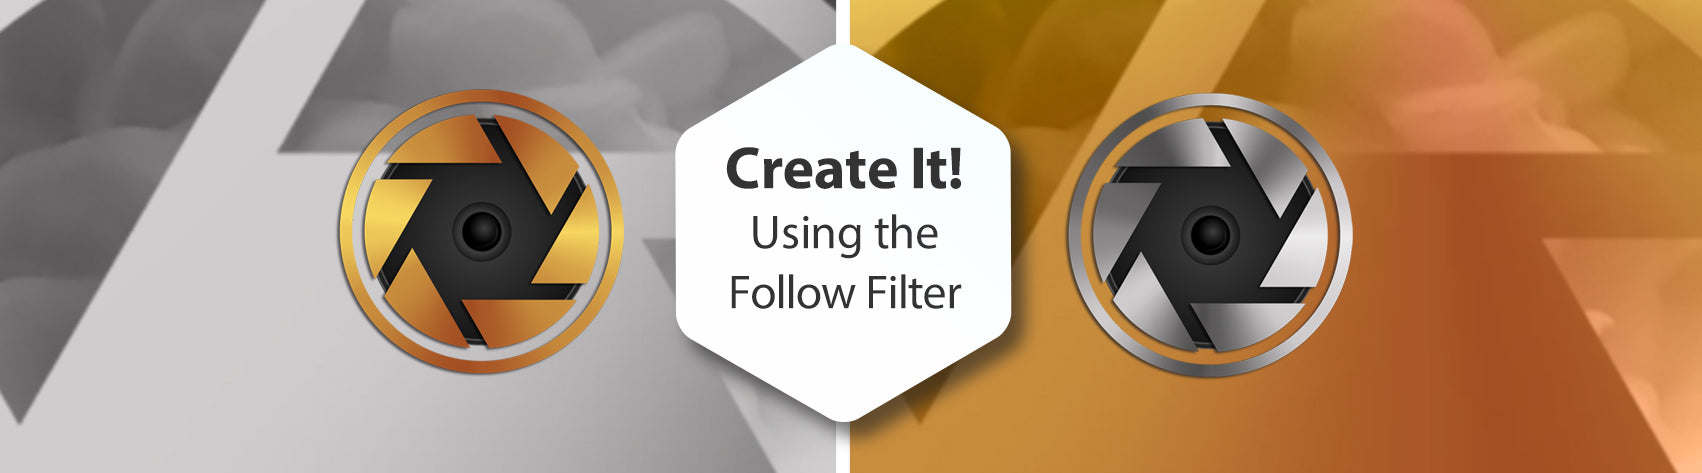 Create It! Using the Follow Filter